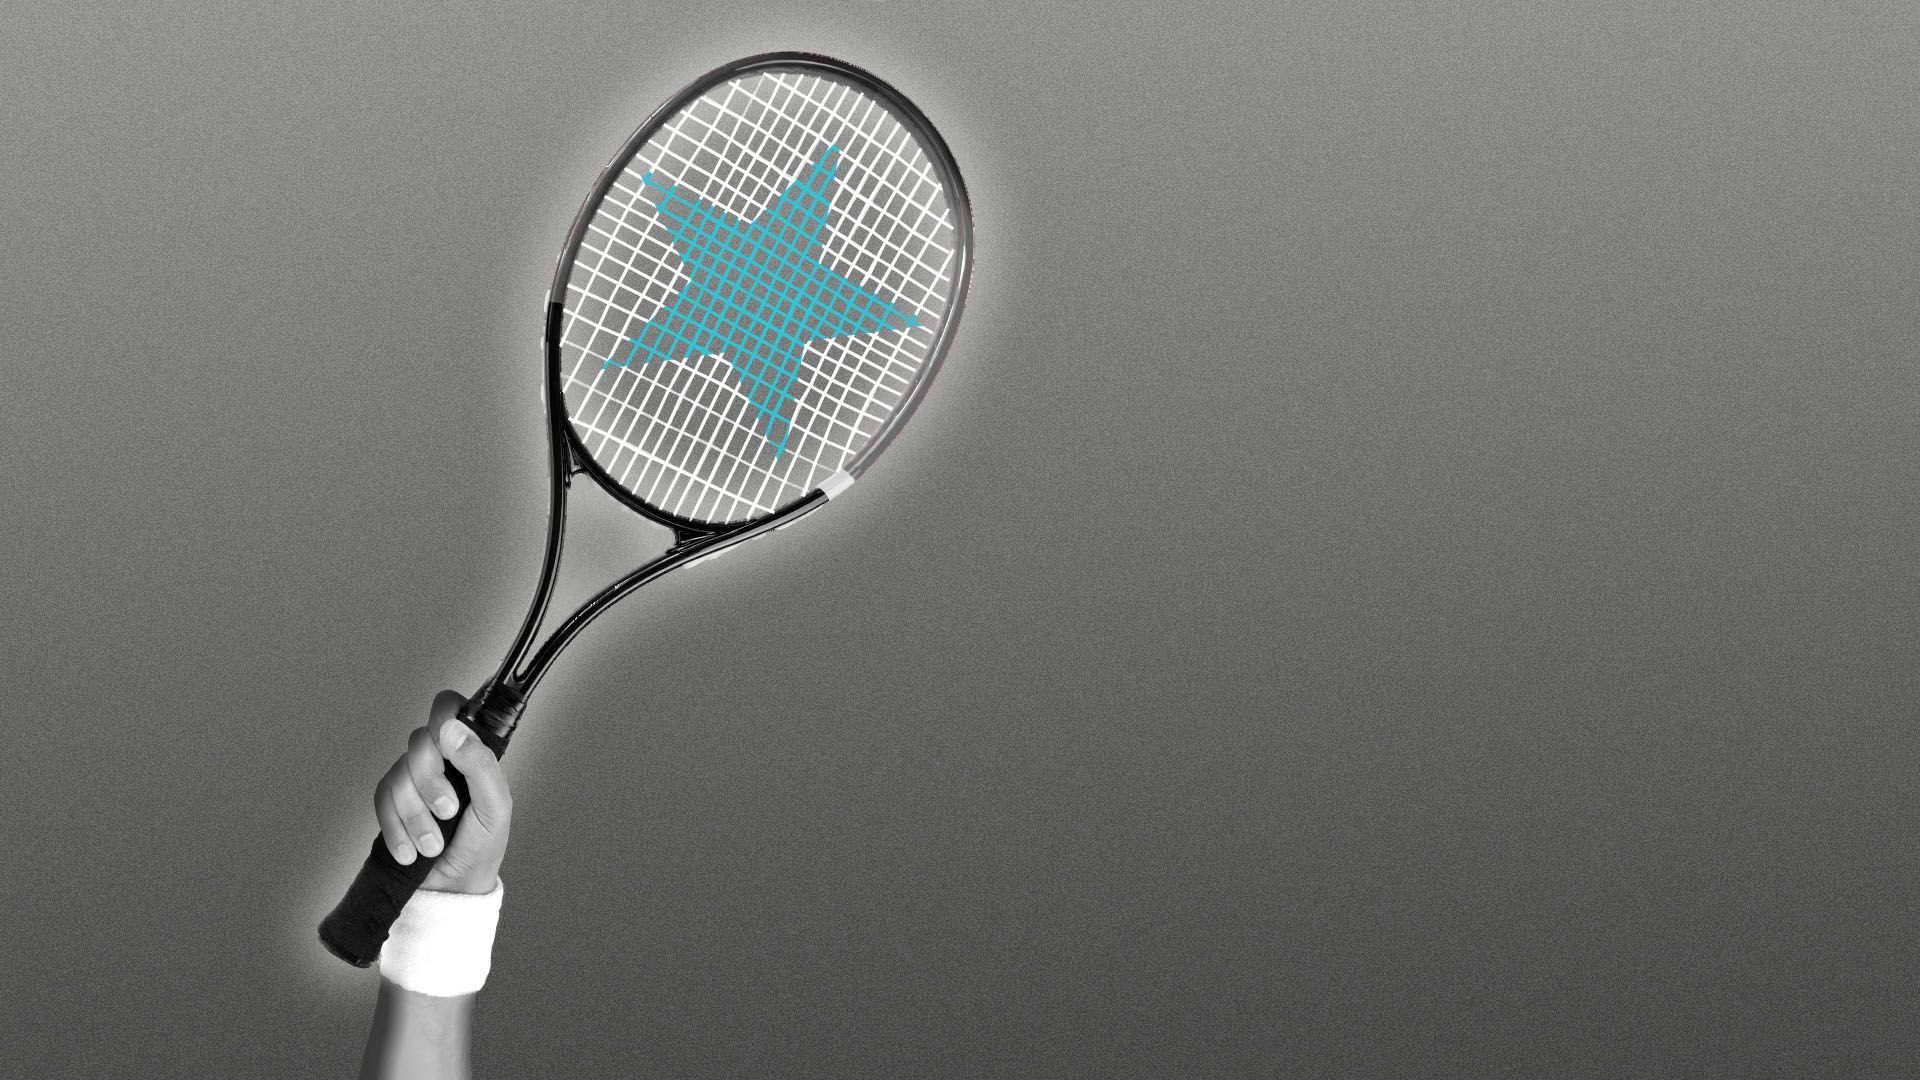 Illustration of a tennis racket being held up with a star imprinted on it